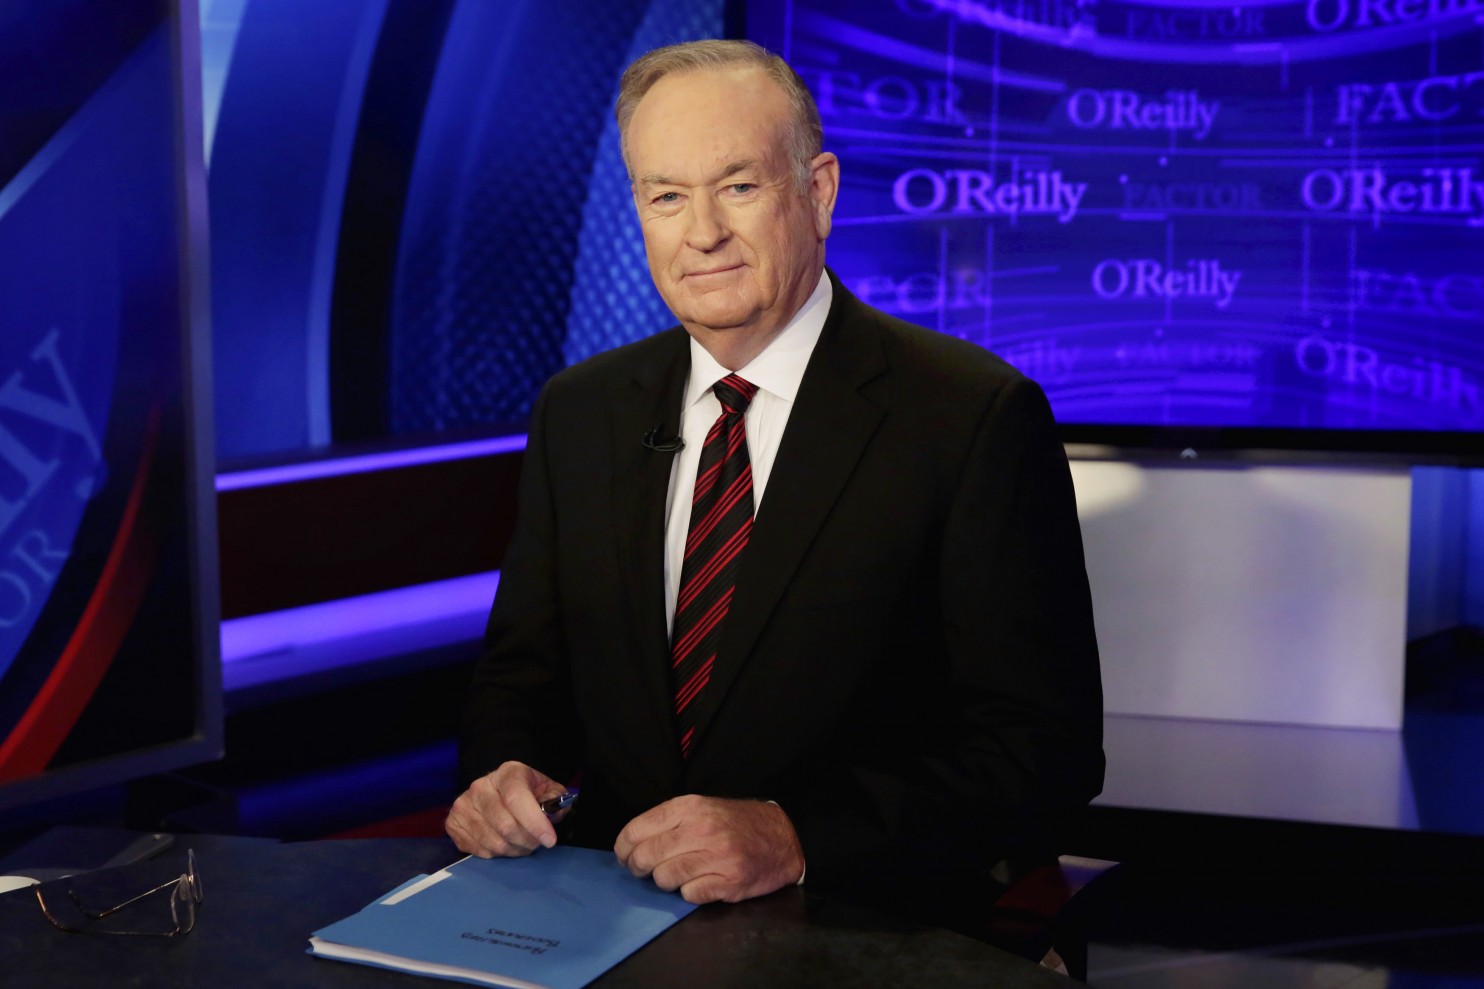 Bill O’Reilly Out at Fox News